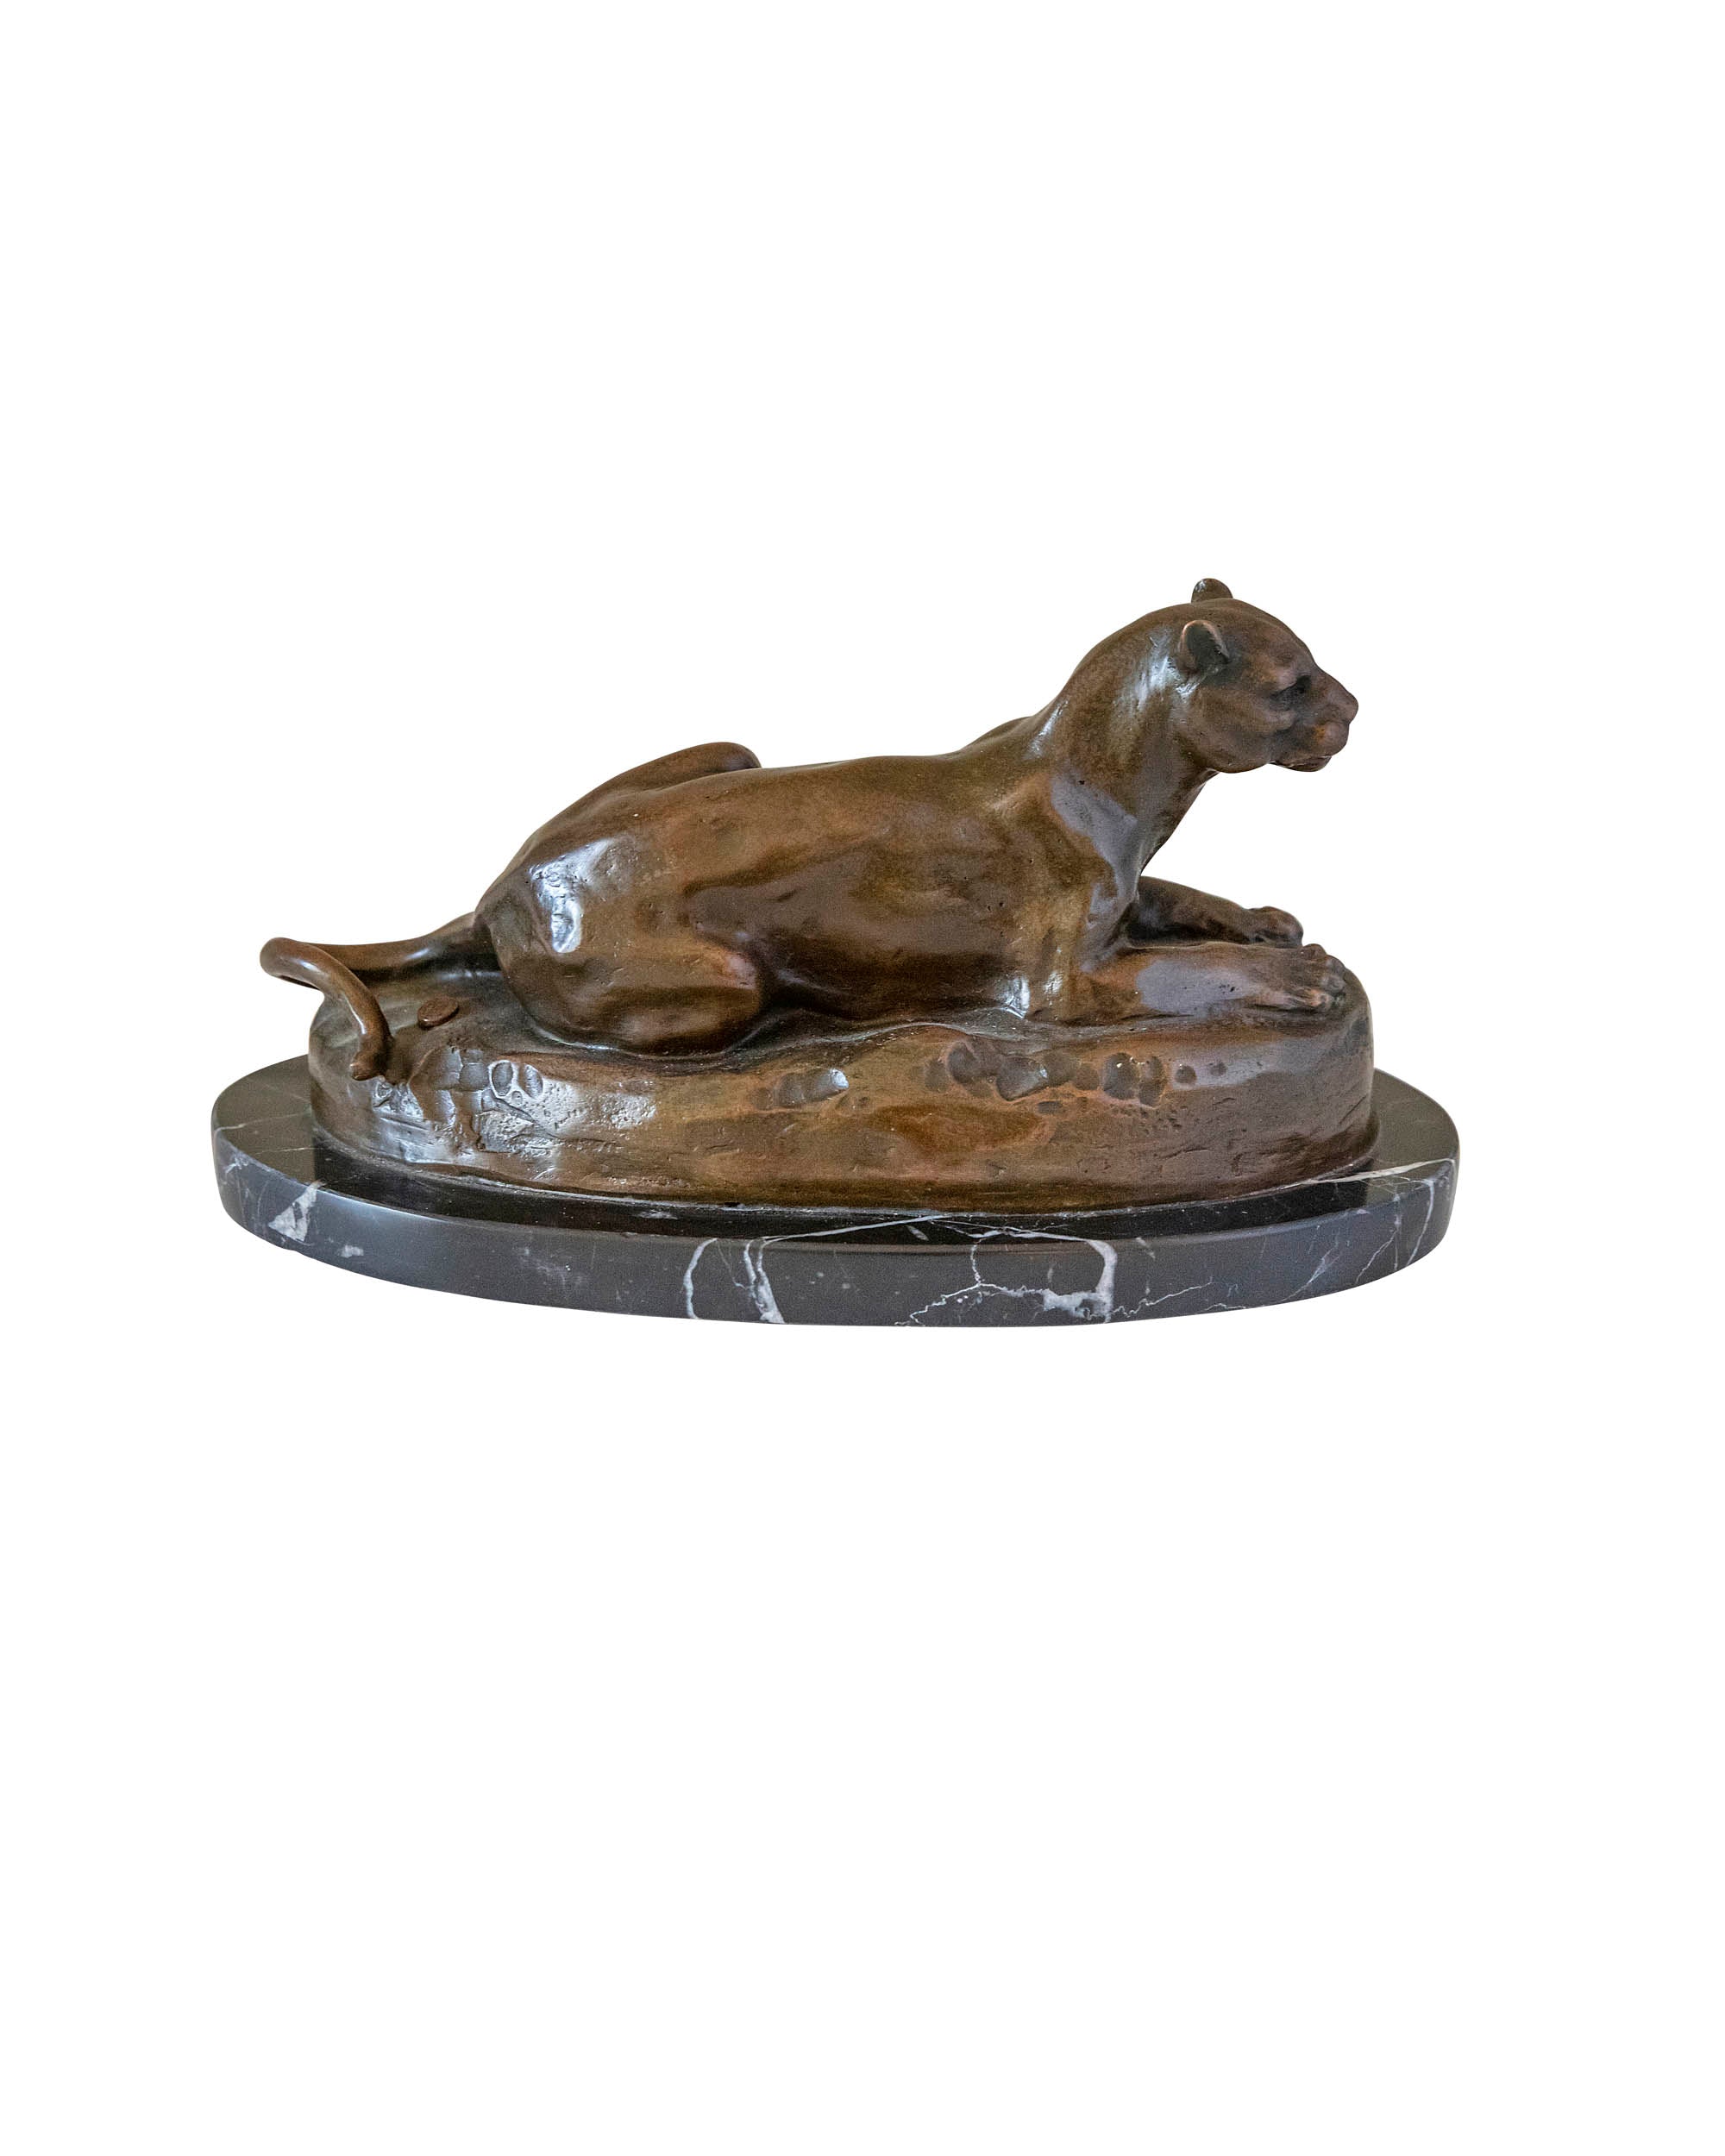 Bronze of a seated panther with a marble base